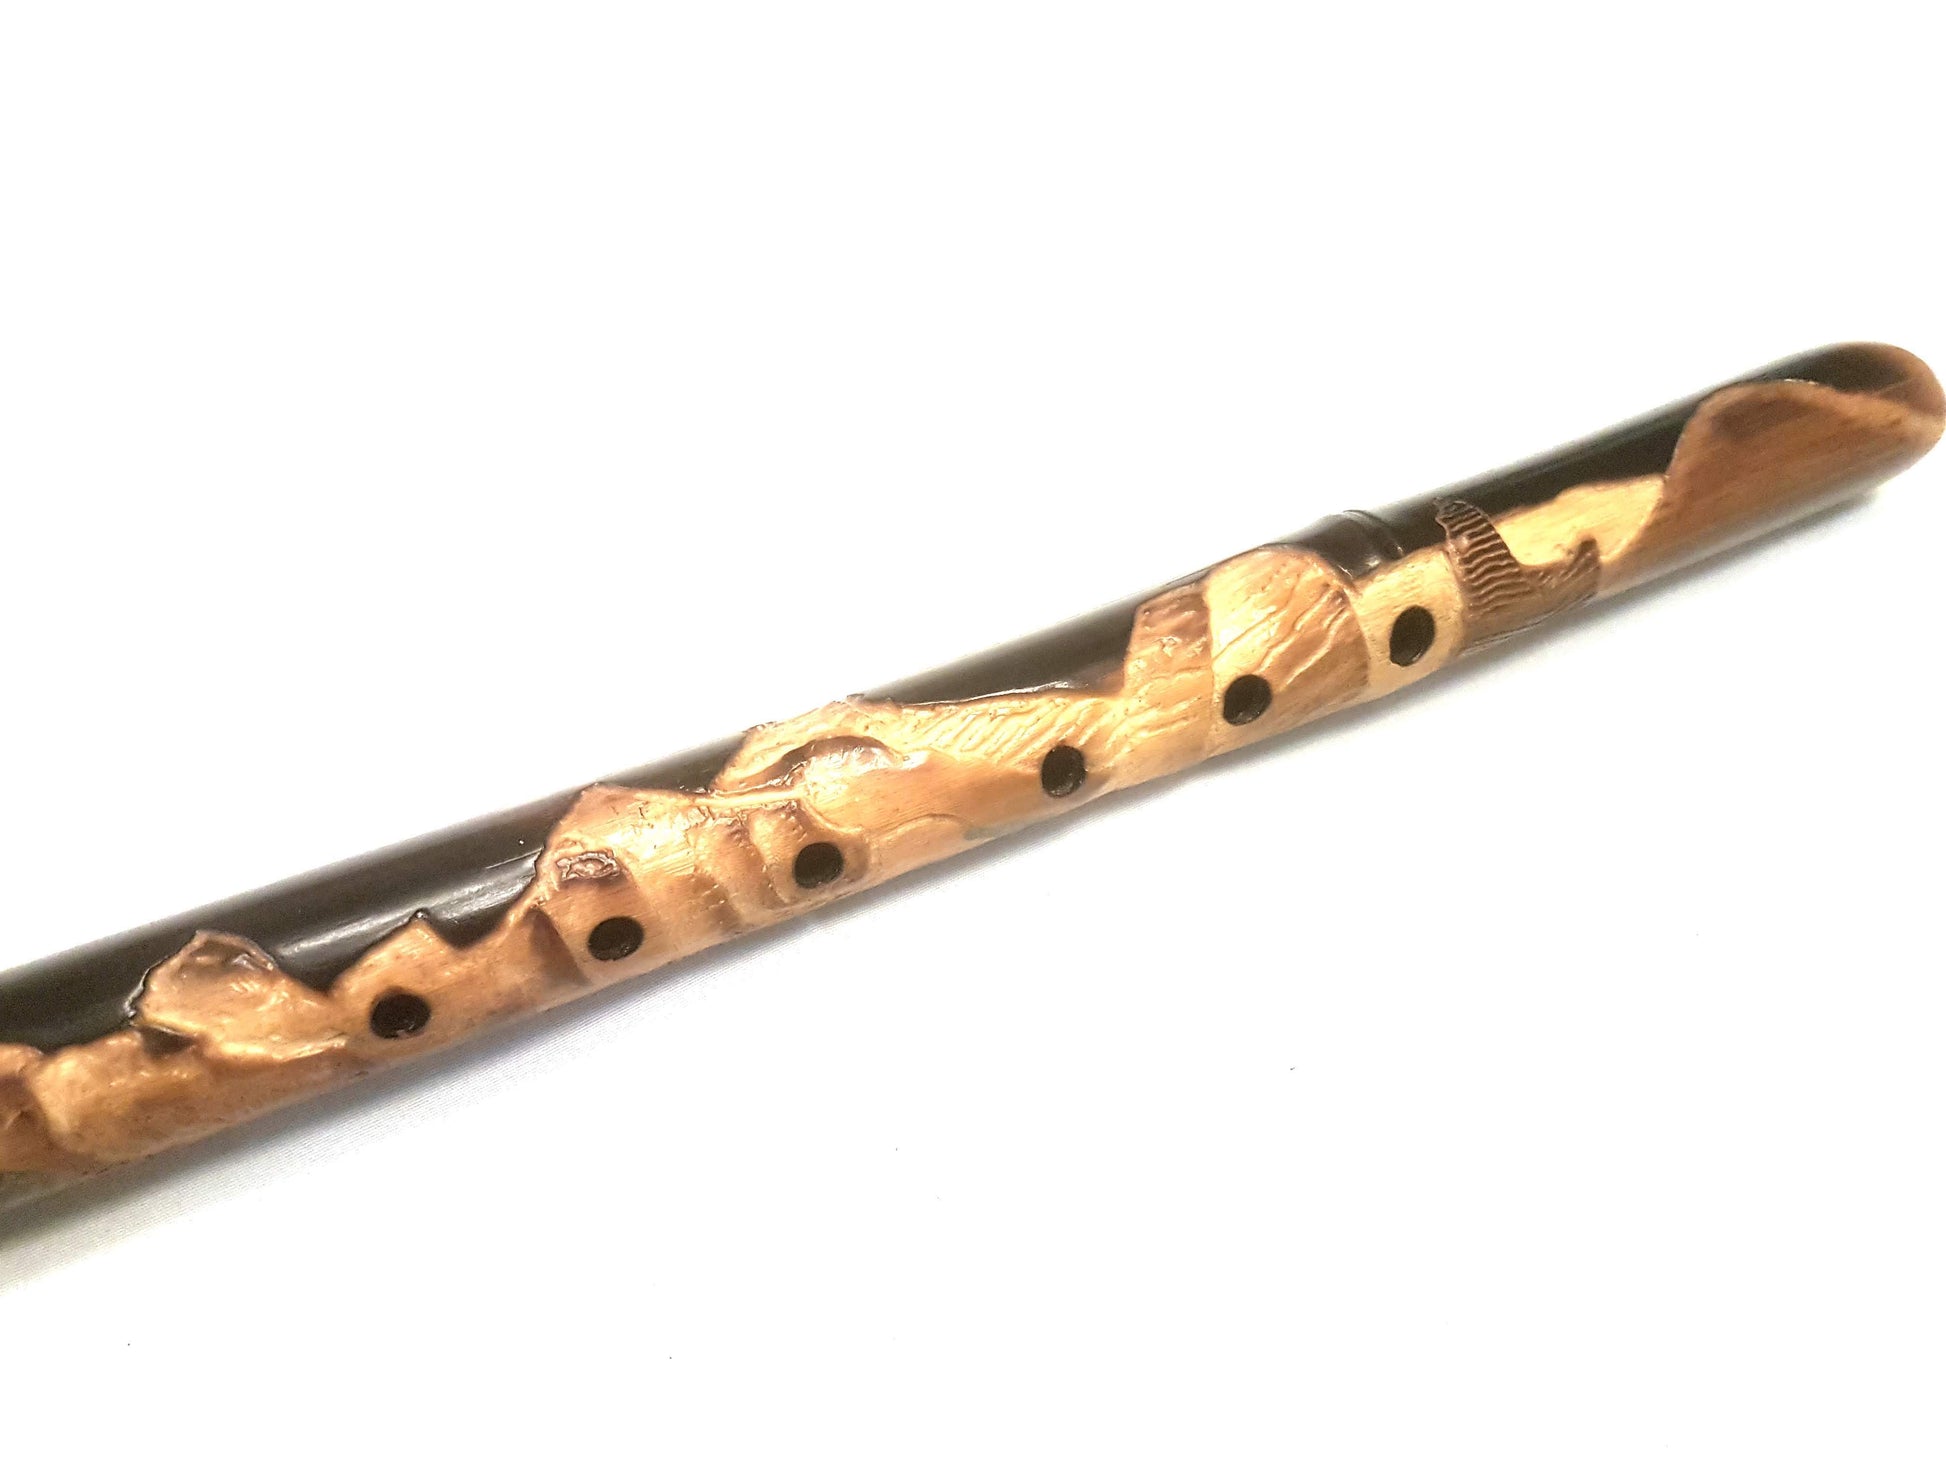 Emerald River Native American Style Flute: Details of Carving of mountains